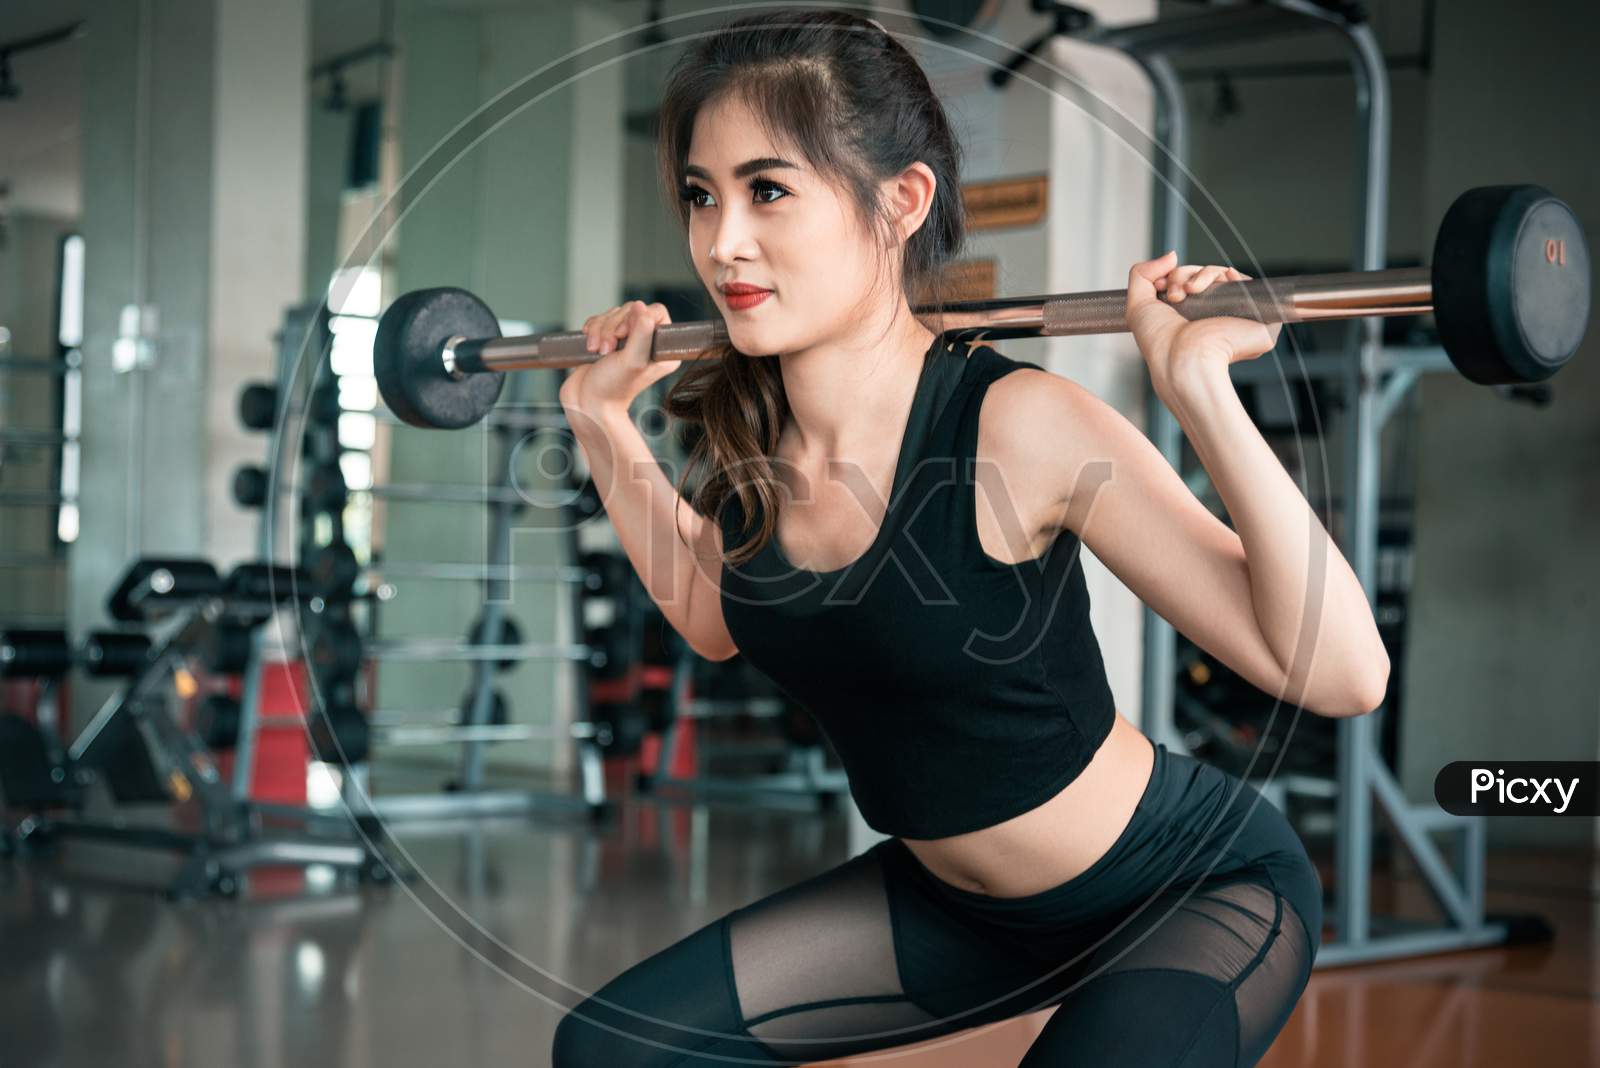 Sports Woman Lifting Weight In Fitness Gym. Workout Exercise And Body Build Up Concept. Barbell Lifting And Beauty Theme.